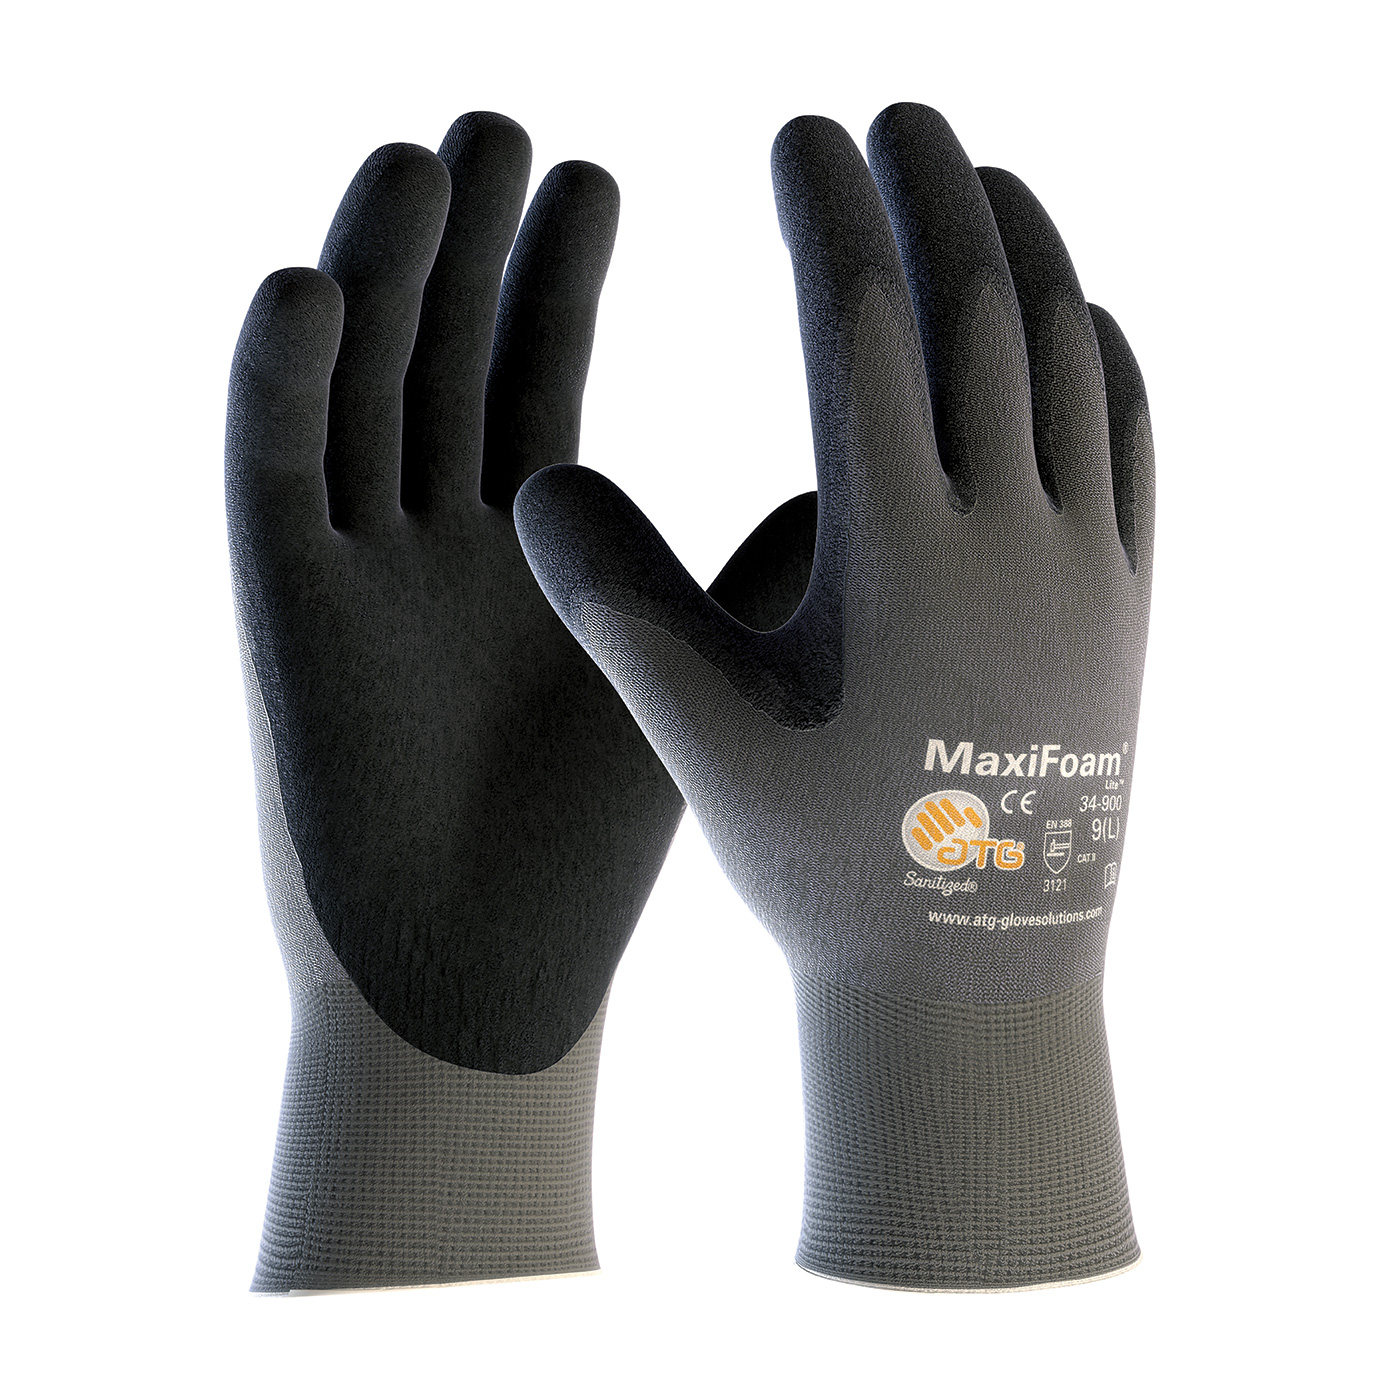 PIP 34-900/L MaxiFoam Lite Seamless Knit Nylon Glove with Nitrile Coated Foam Grip on Palm & Finger - Large PID-34 900 L